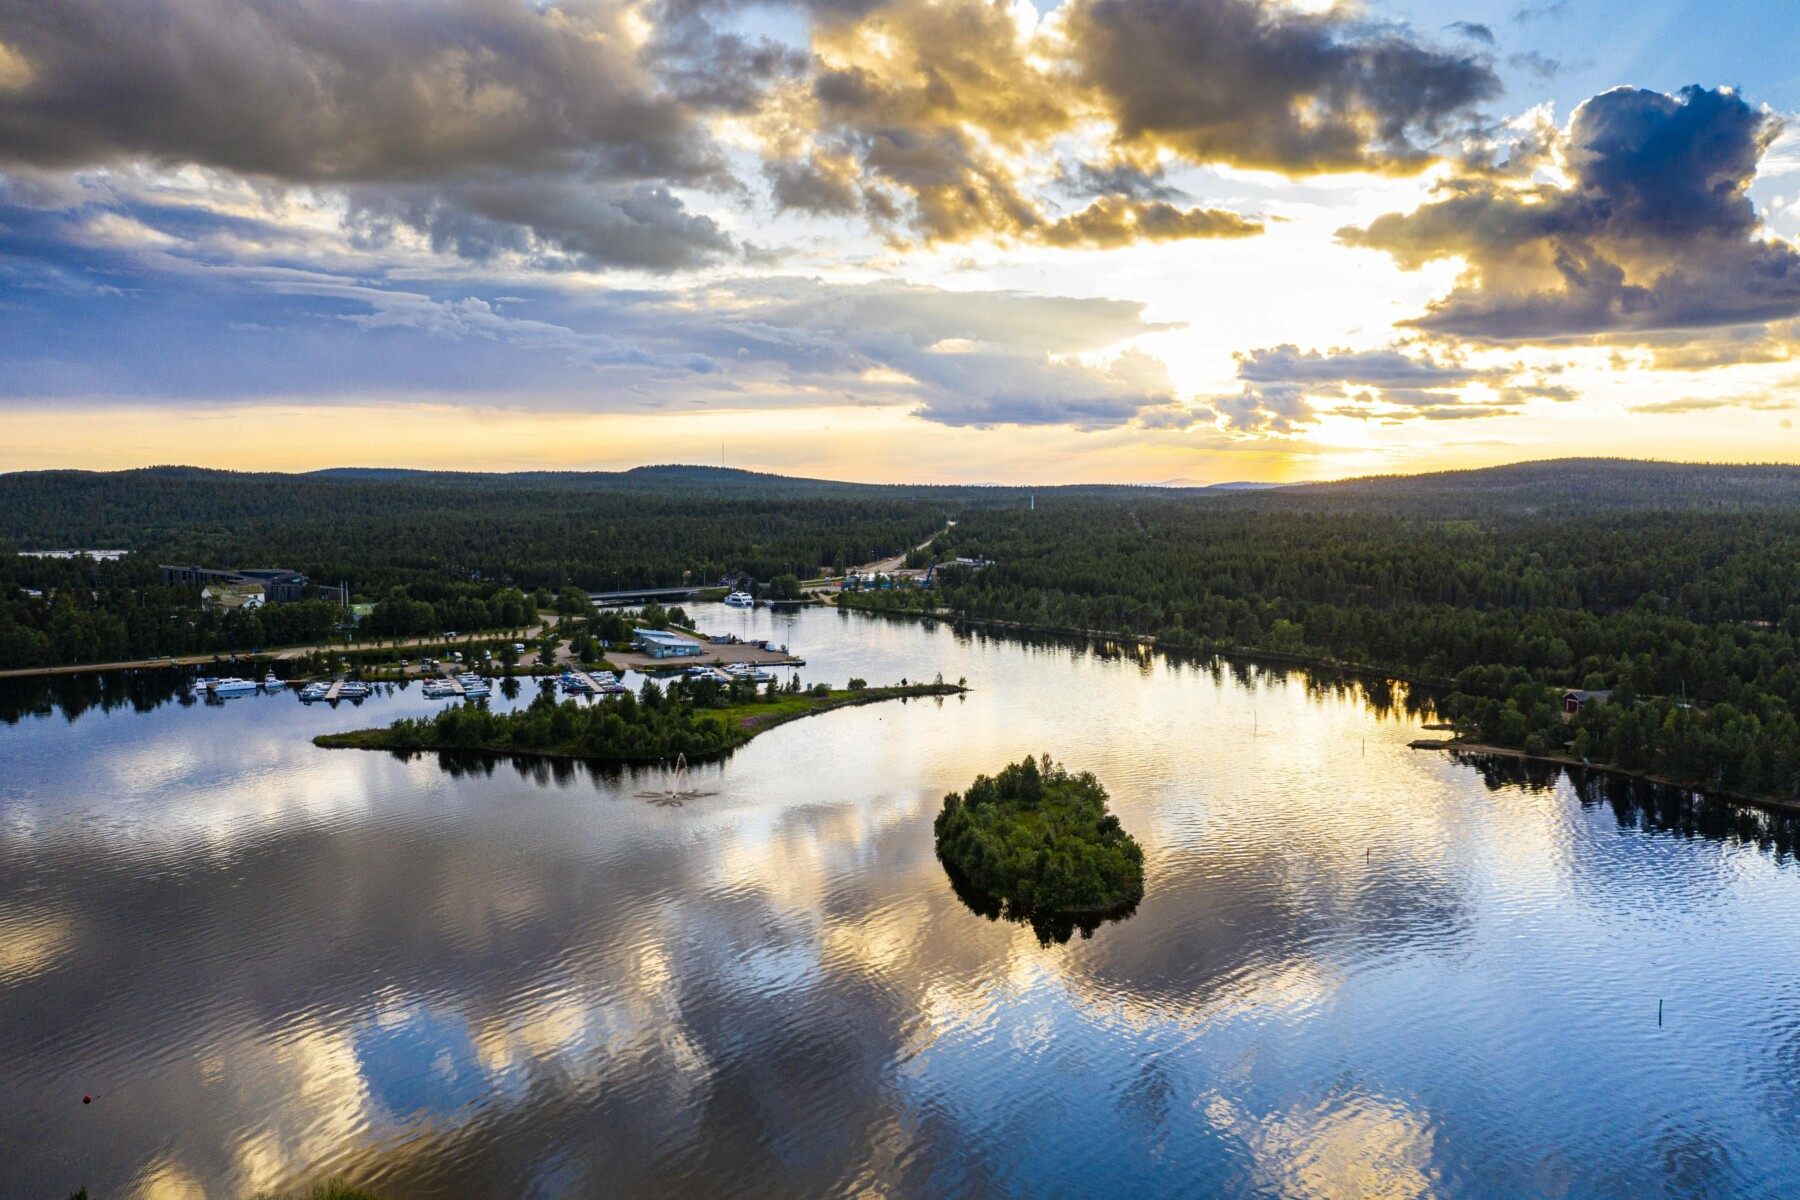 In an aerial shot, the water of a forest-lined lake reflects the sky and clouds.